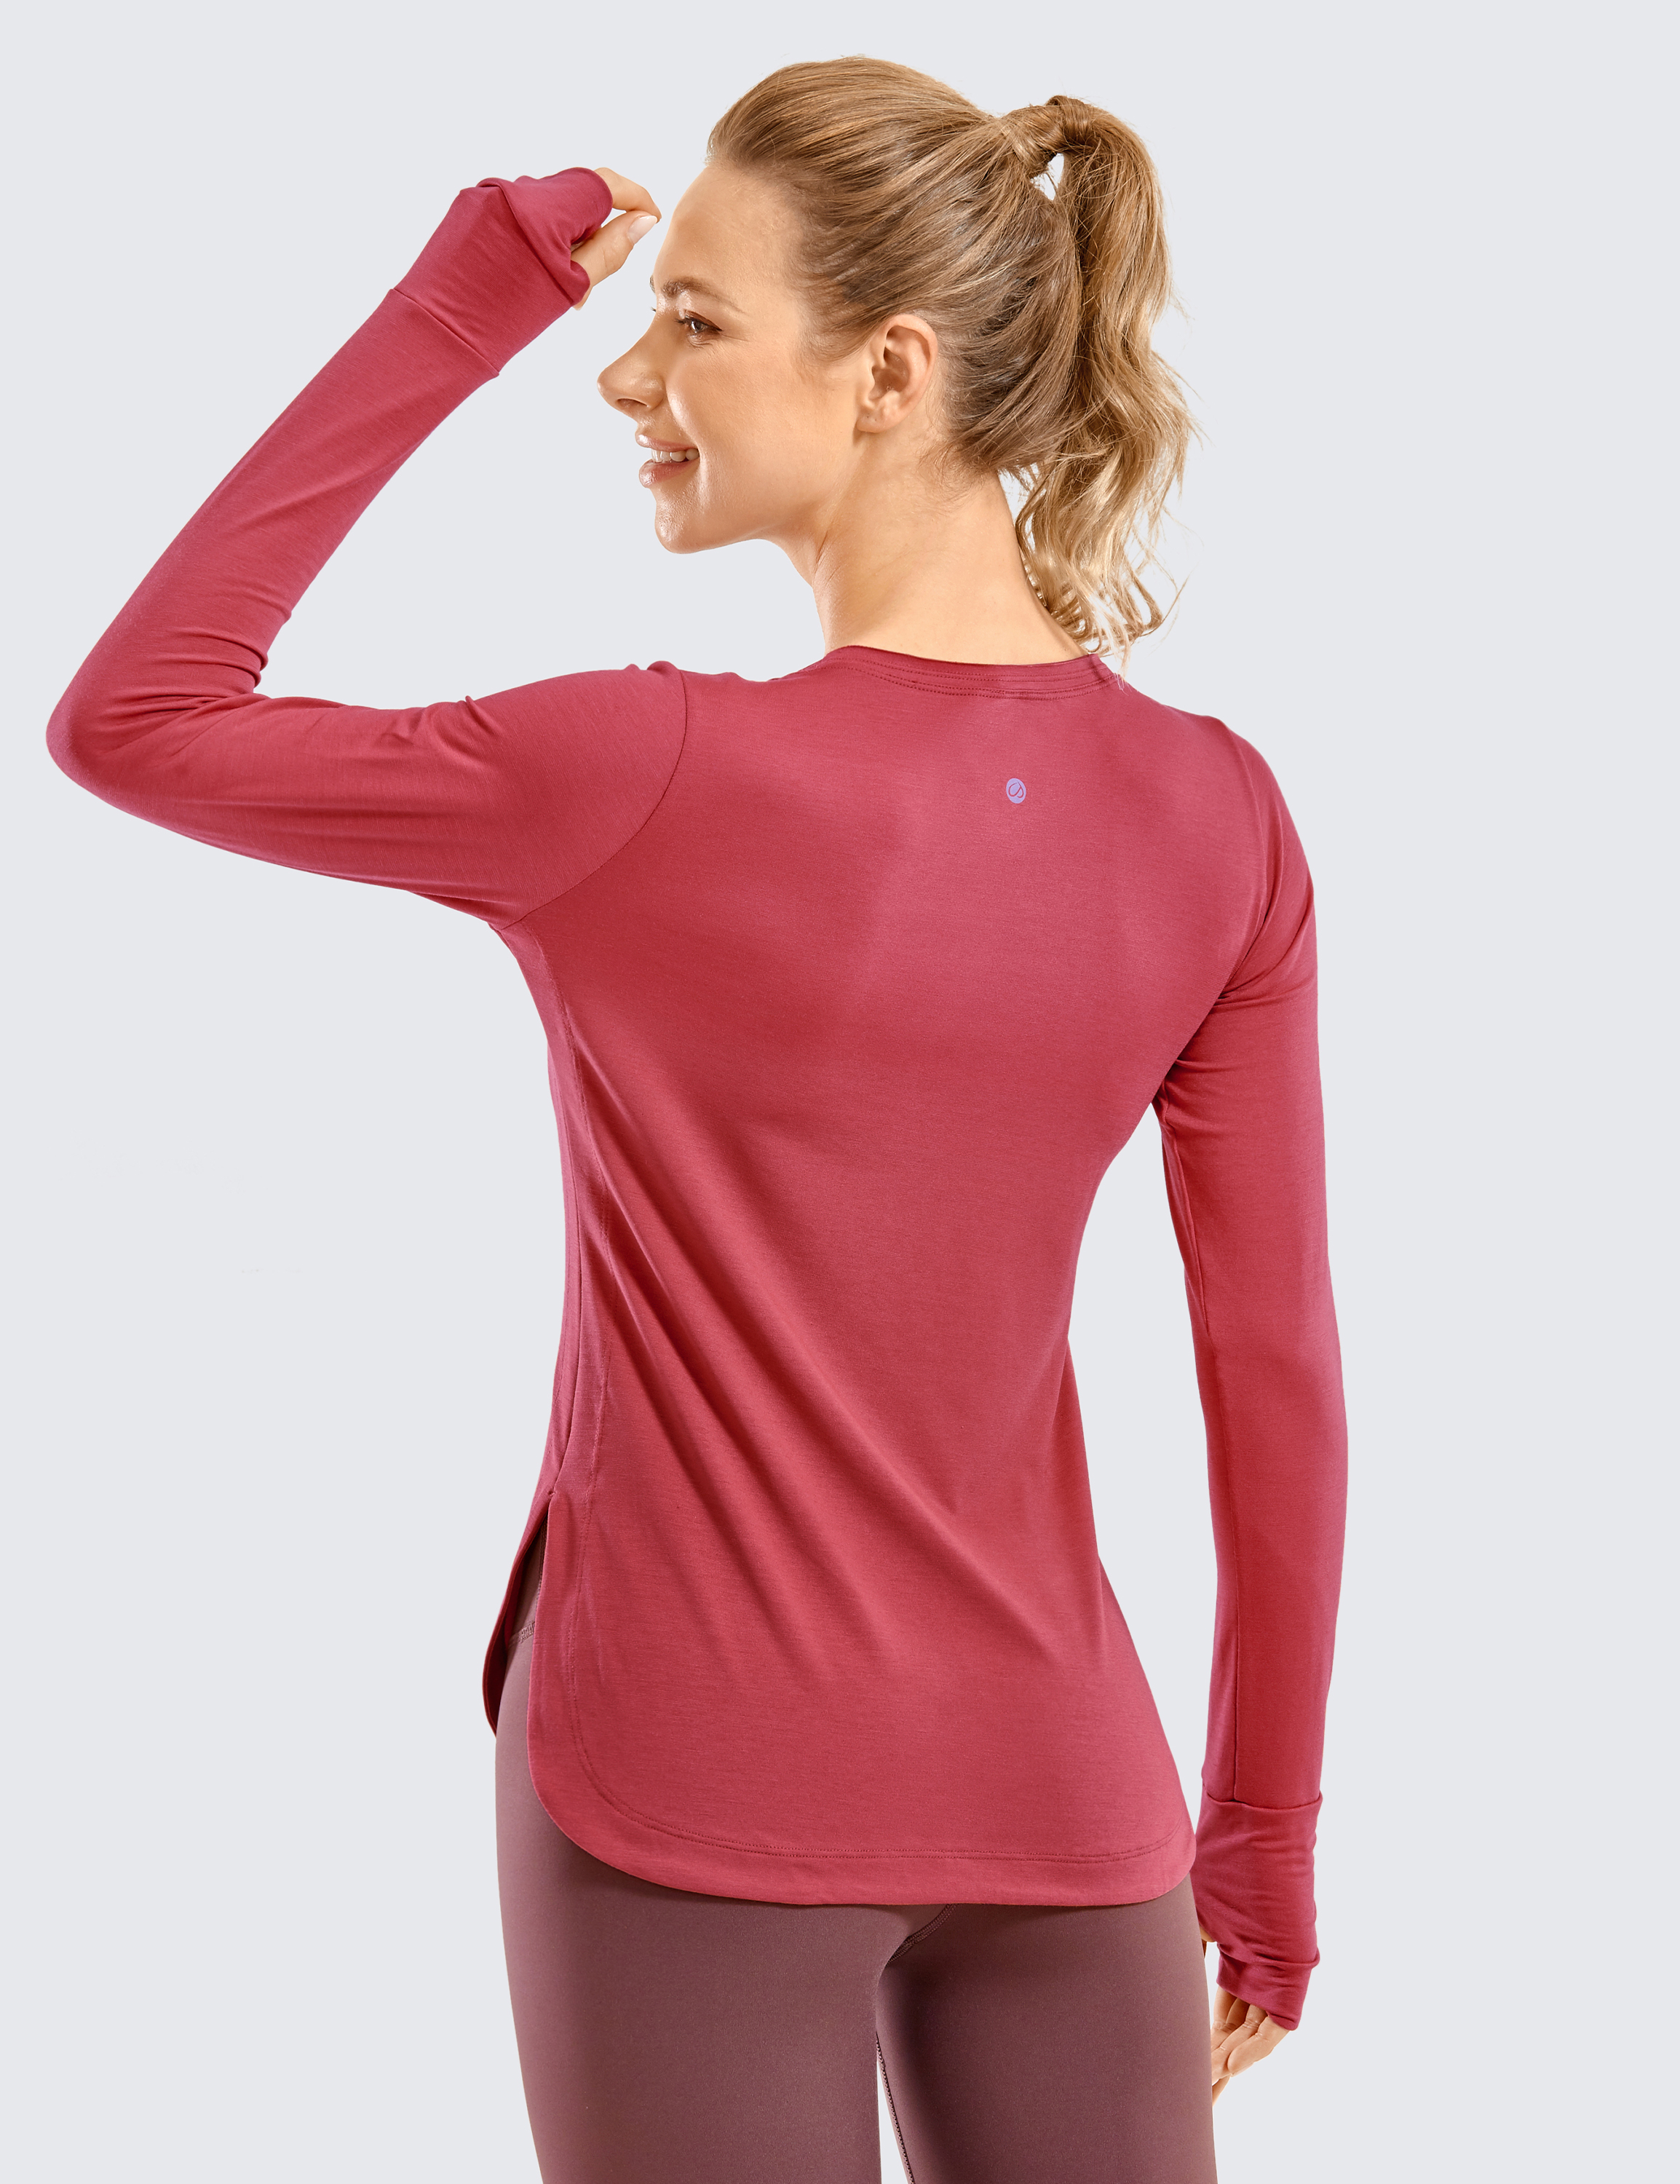  MathCat Long Sleeve Workout Shirts For Women Breathable Athletic  Tops Gym Shirts Yoga Running Workout Tops For Women Slim Fit